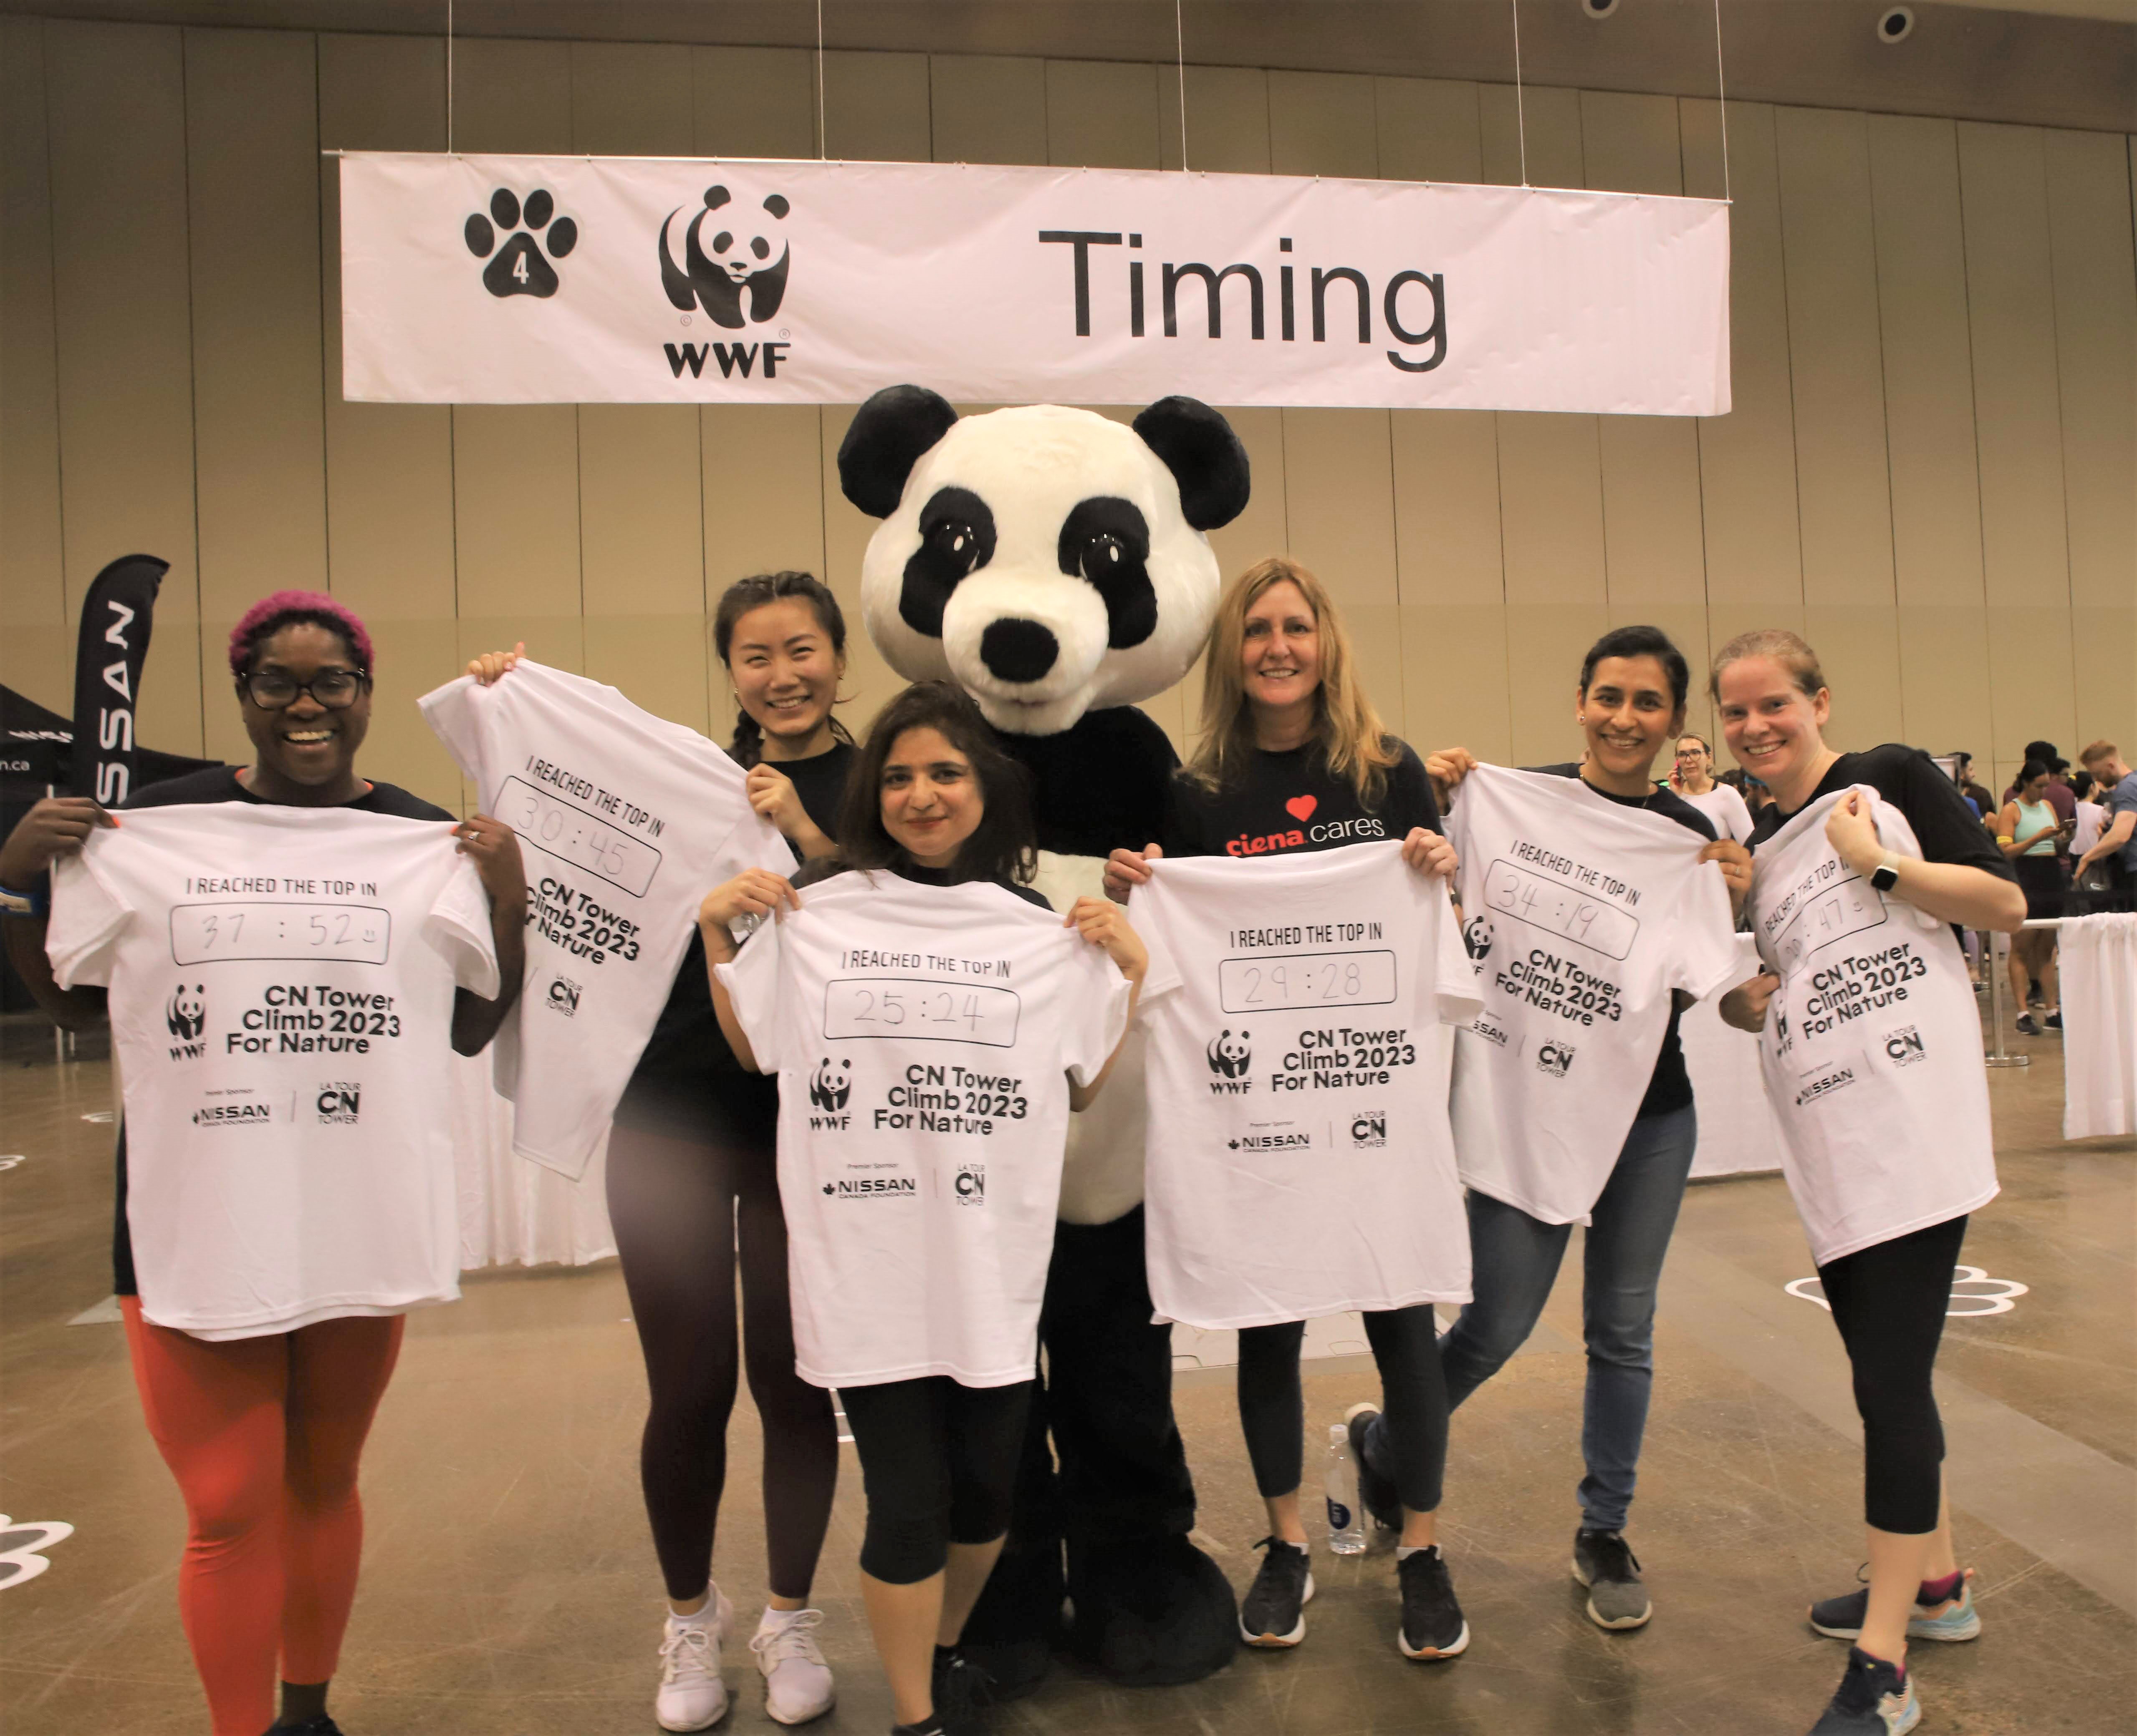 Women with T-shirts from the World Wildlife Fund